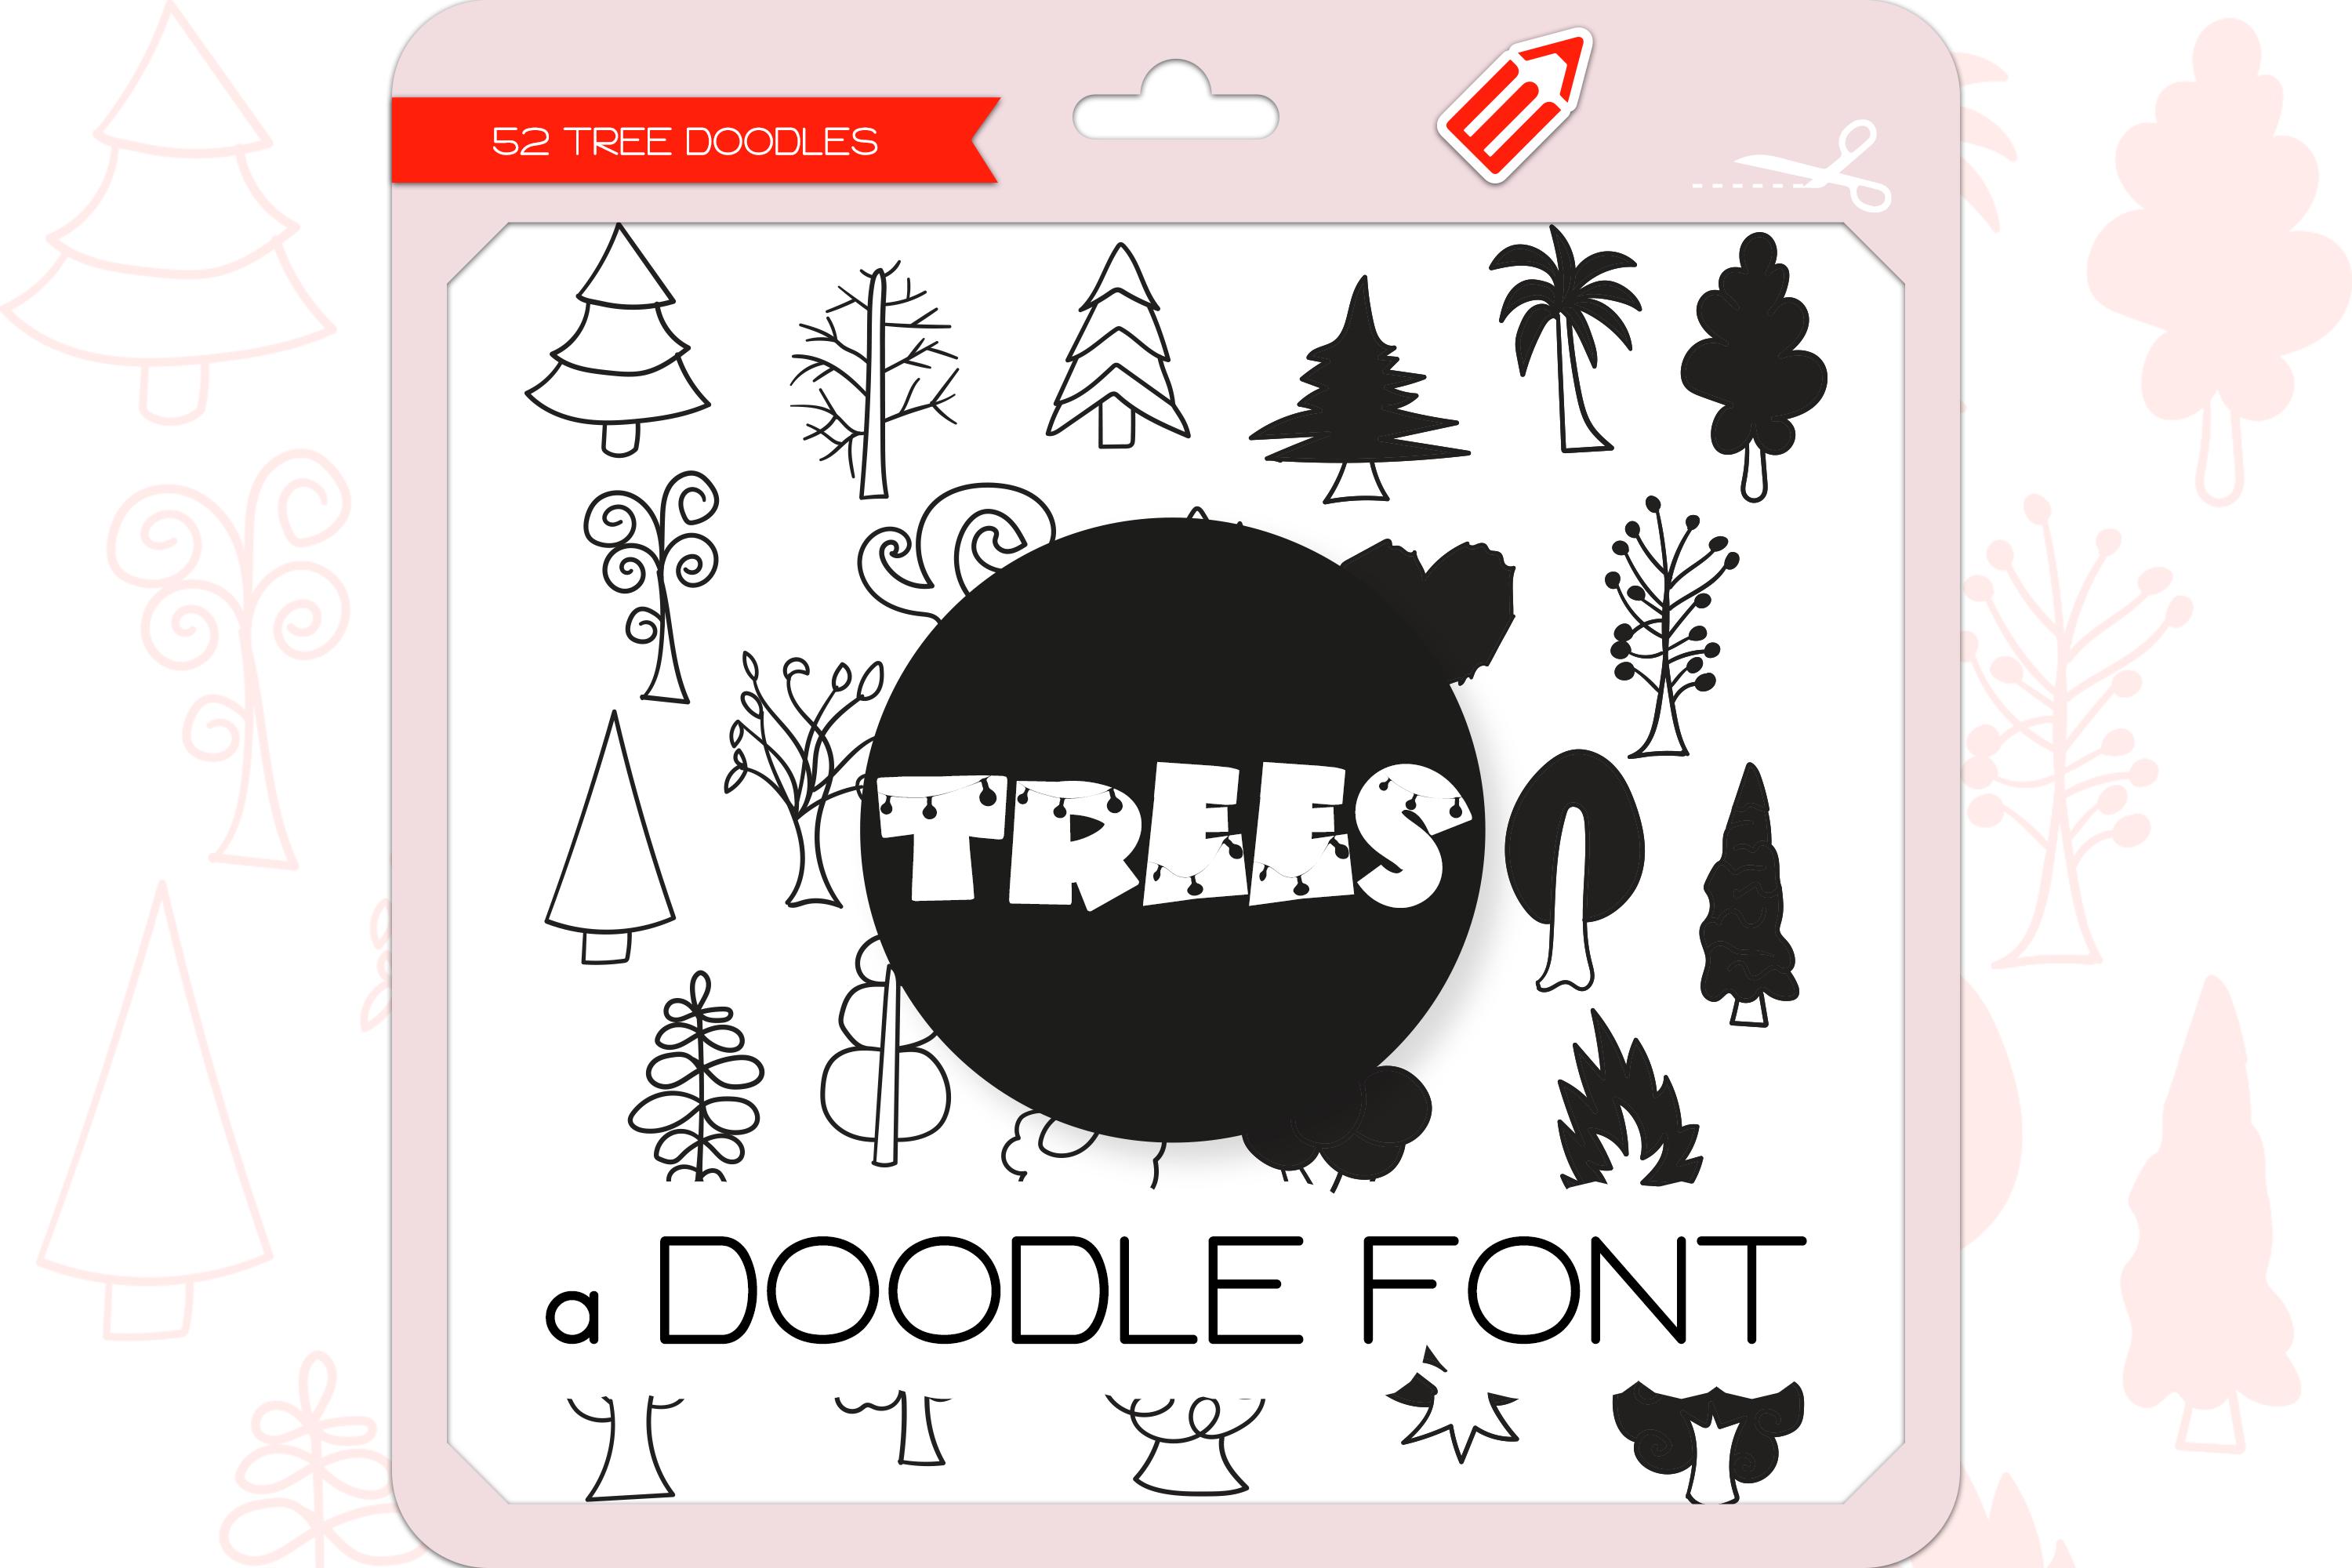 The Trees Font